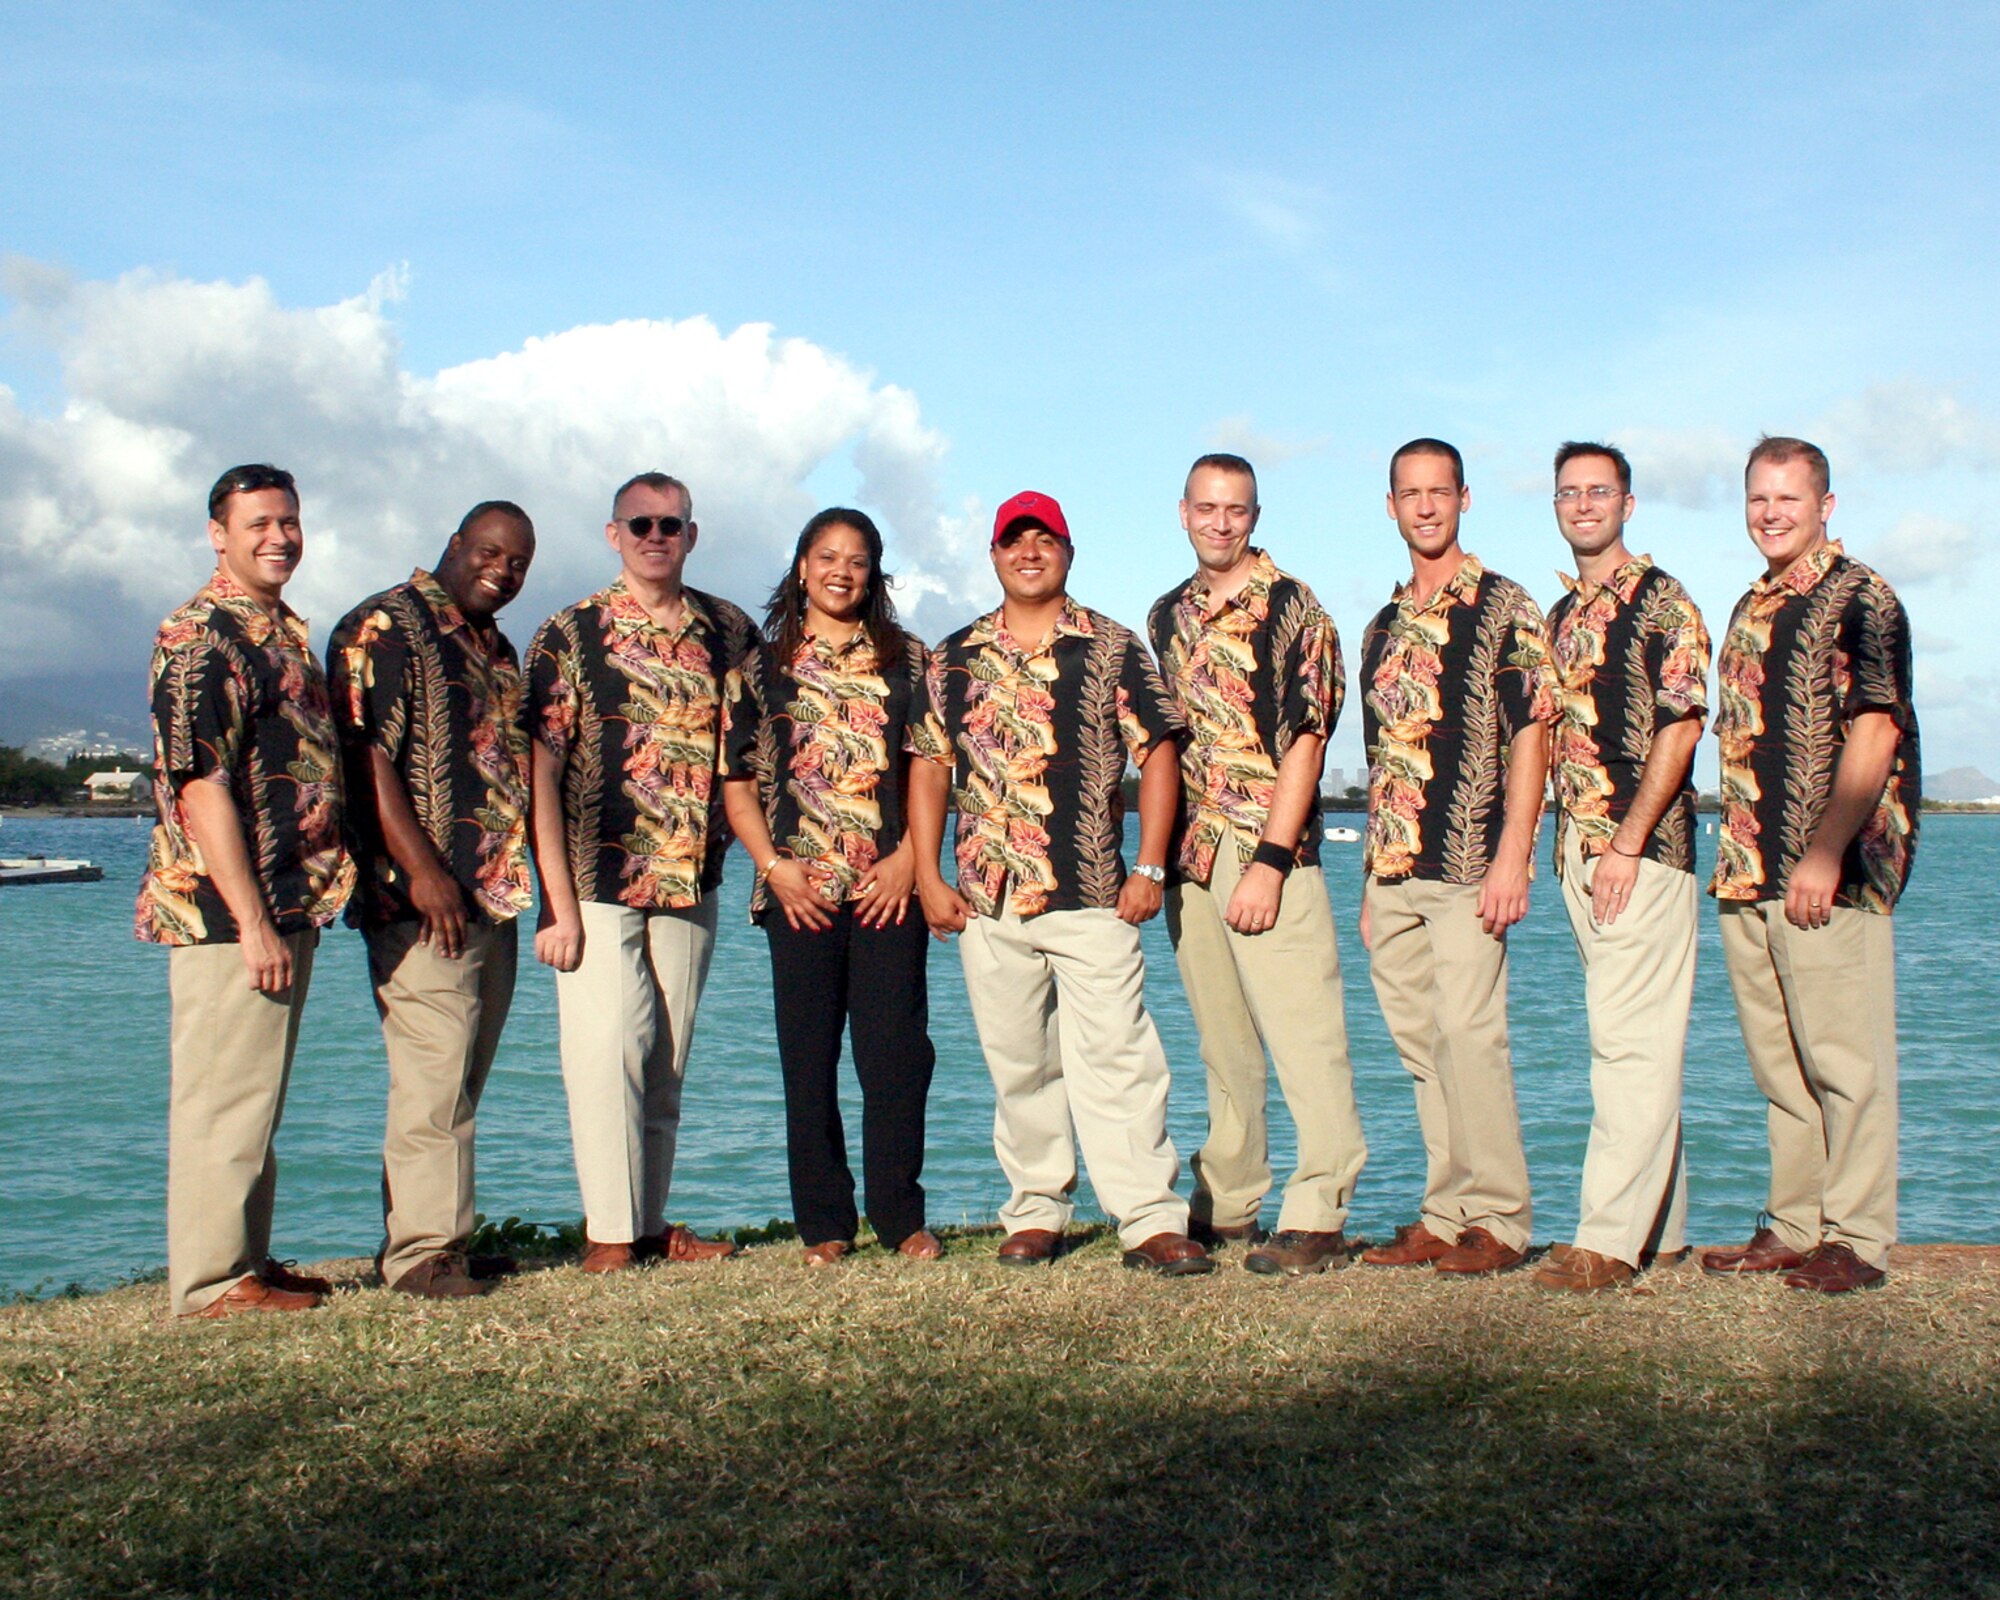 From left to right, U.S. Air Force Technical Sergeant Joshua M. Fedele,   Staff Sergeant Terry J. Grace, Master Sergeant Daryl Yager, Staff Sergeant Tamiko Boone, Staff Sergeant Richard Vasquez Jr., Staff Sergeant David E. Vittetoe,   Staff Sergeant John Kukan, Master Sergeant David C. Jenkins, and Staff Sergeant Gregory S. Lacy, are  members of the Air Force Band of the Pacific, ‘Hana Hou’, They performed  a concert here May 18 hosted by Col. J.J. Torres, 15th Airlift Wing commander.  Hana Hou’s performances delight military and civilian audiences throughout Hawaii and the Pacific.  (US Air Force photo/ Master Sgt. Cherie McNeill)  